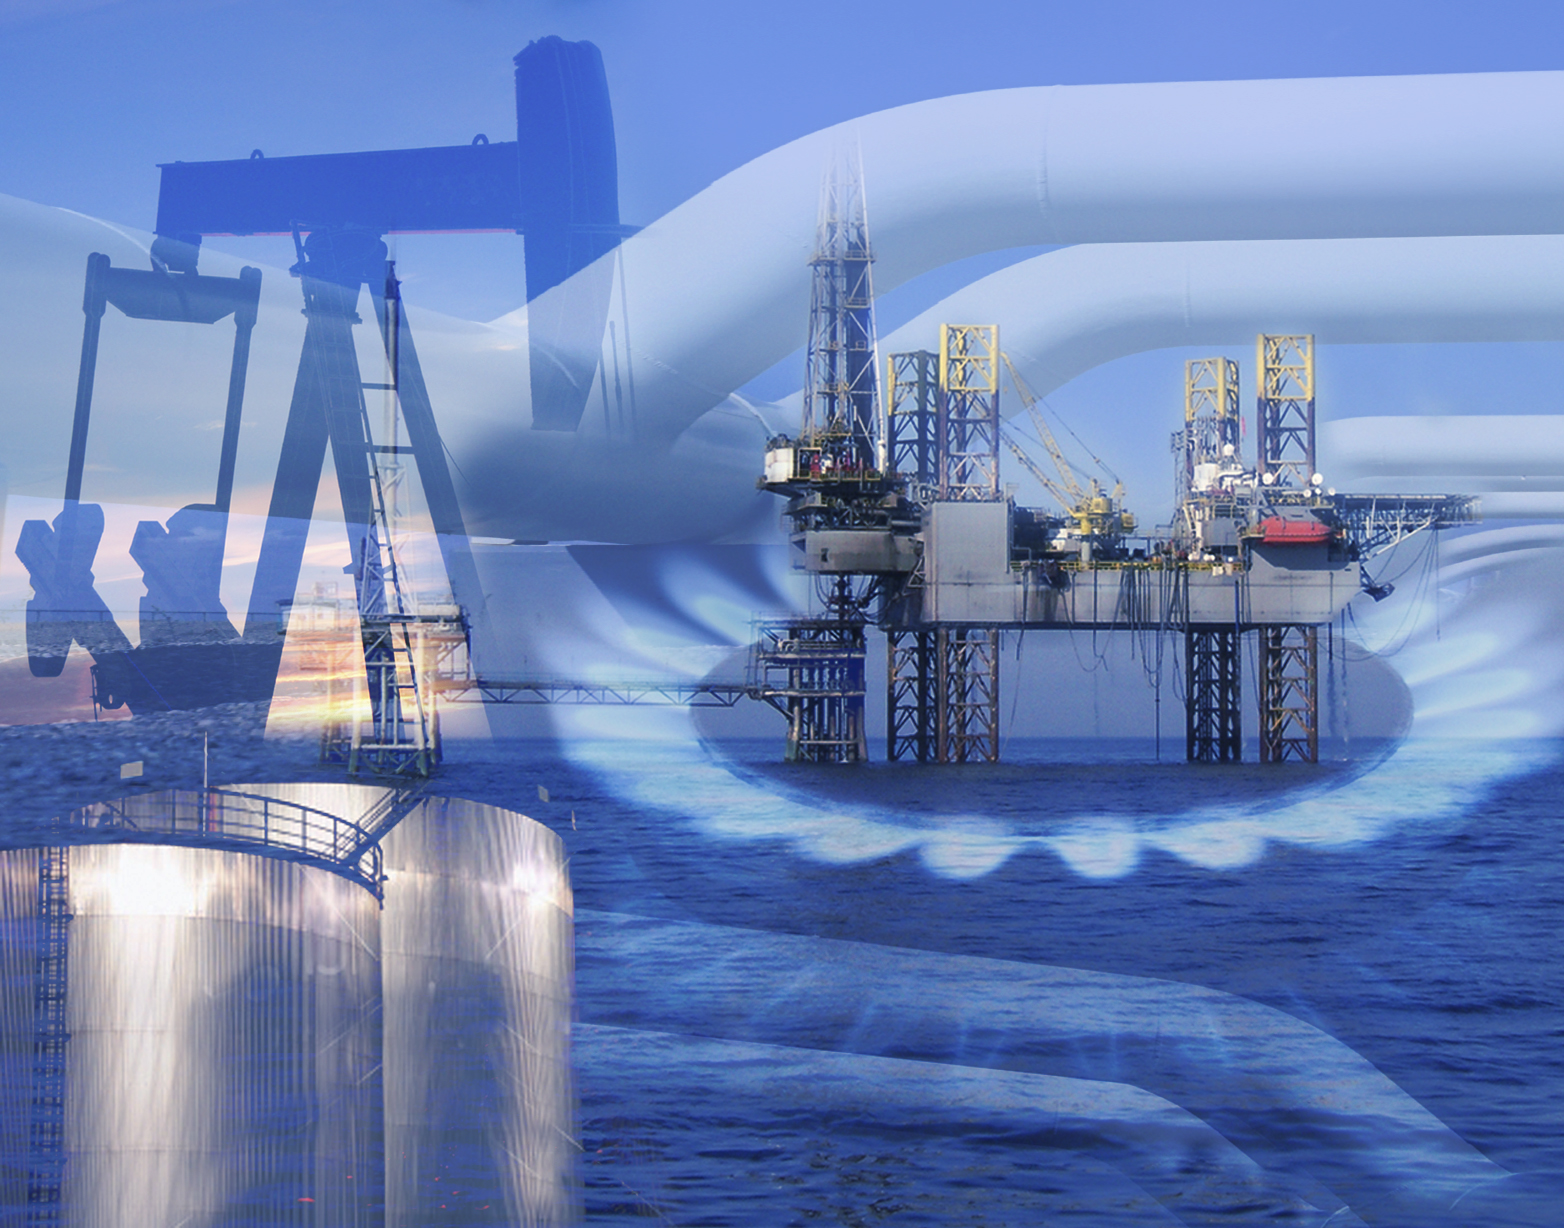 Volumes of oil & gas export revealed